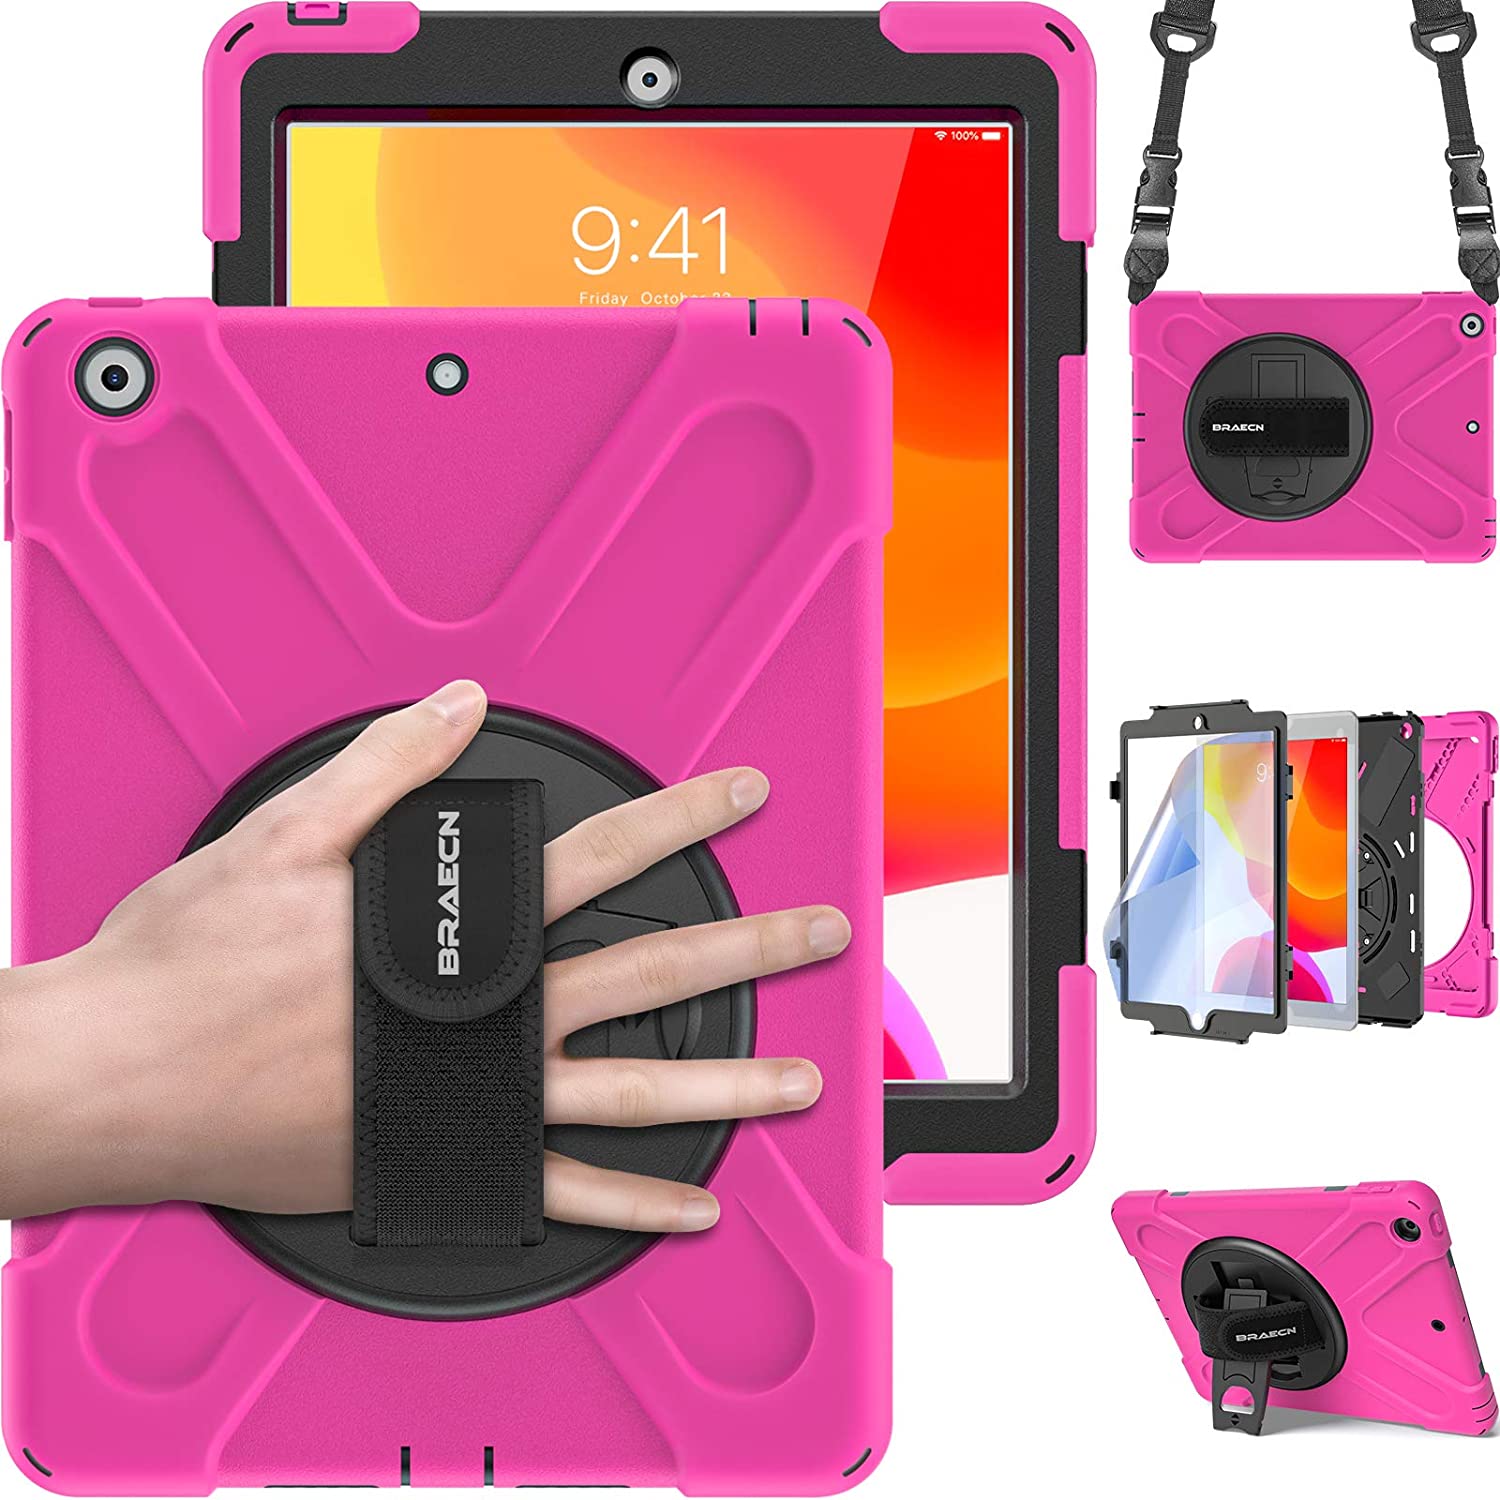 BRAECN iPad 9.7 2018/2017 Case, iPad 5th/6th Generation Case[Heavty Duty] Drop Proof Shockproof Protective Rugged Cover . - e4cents